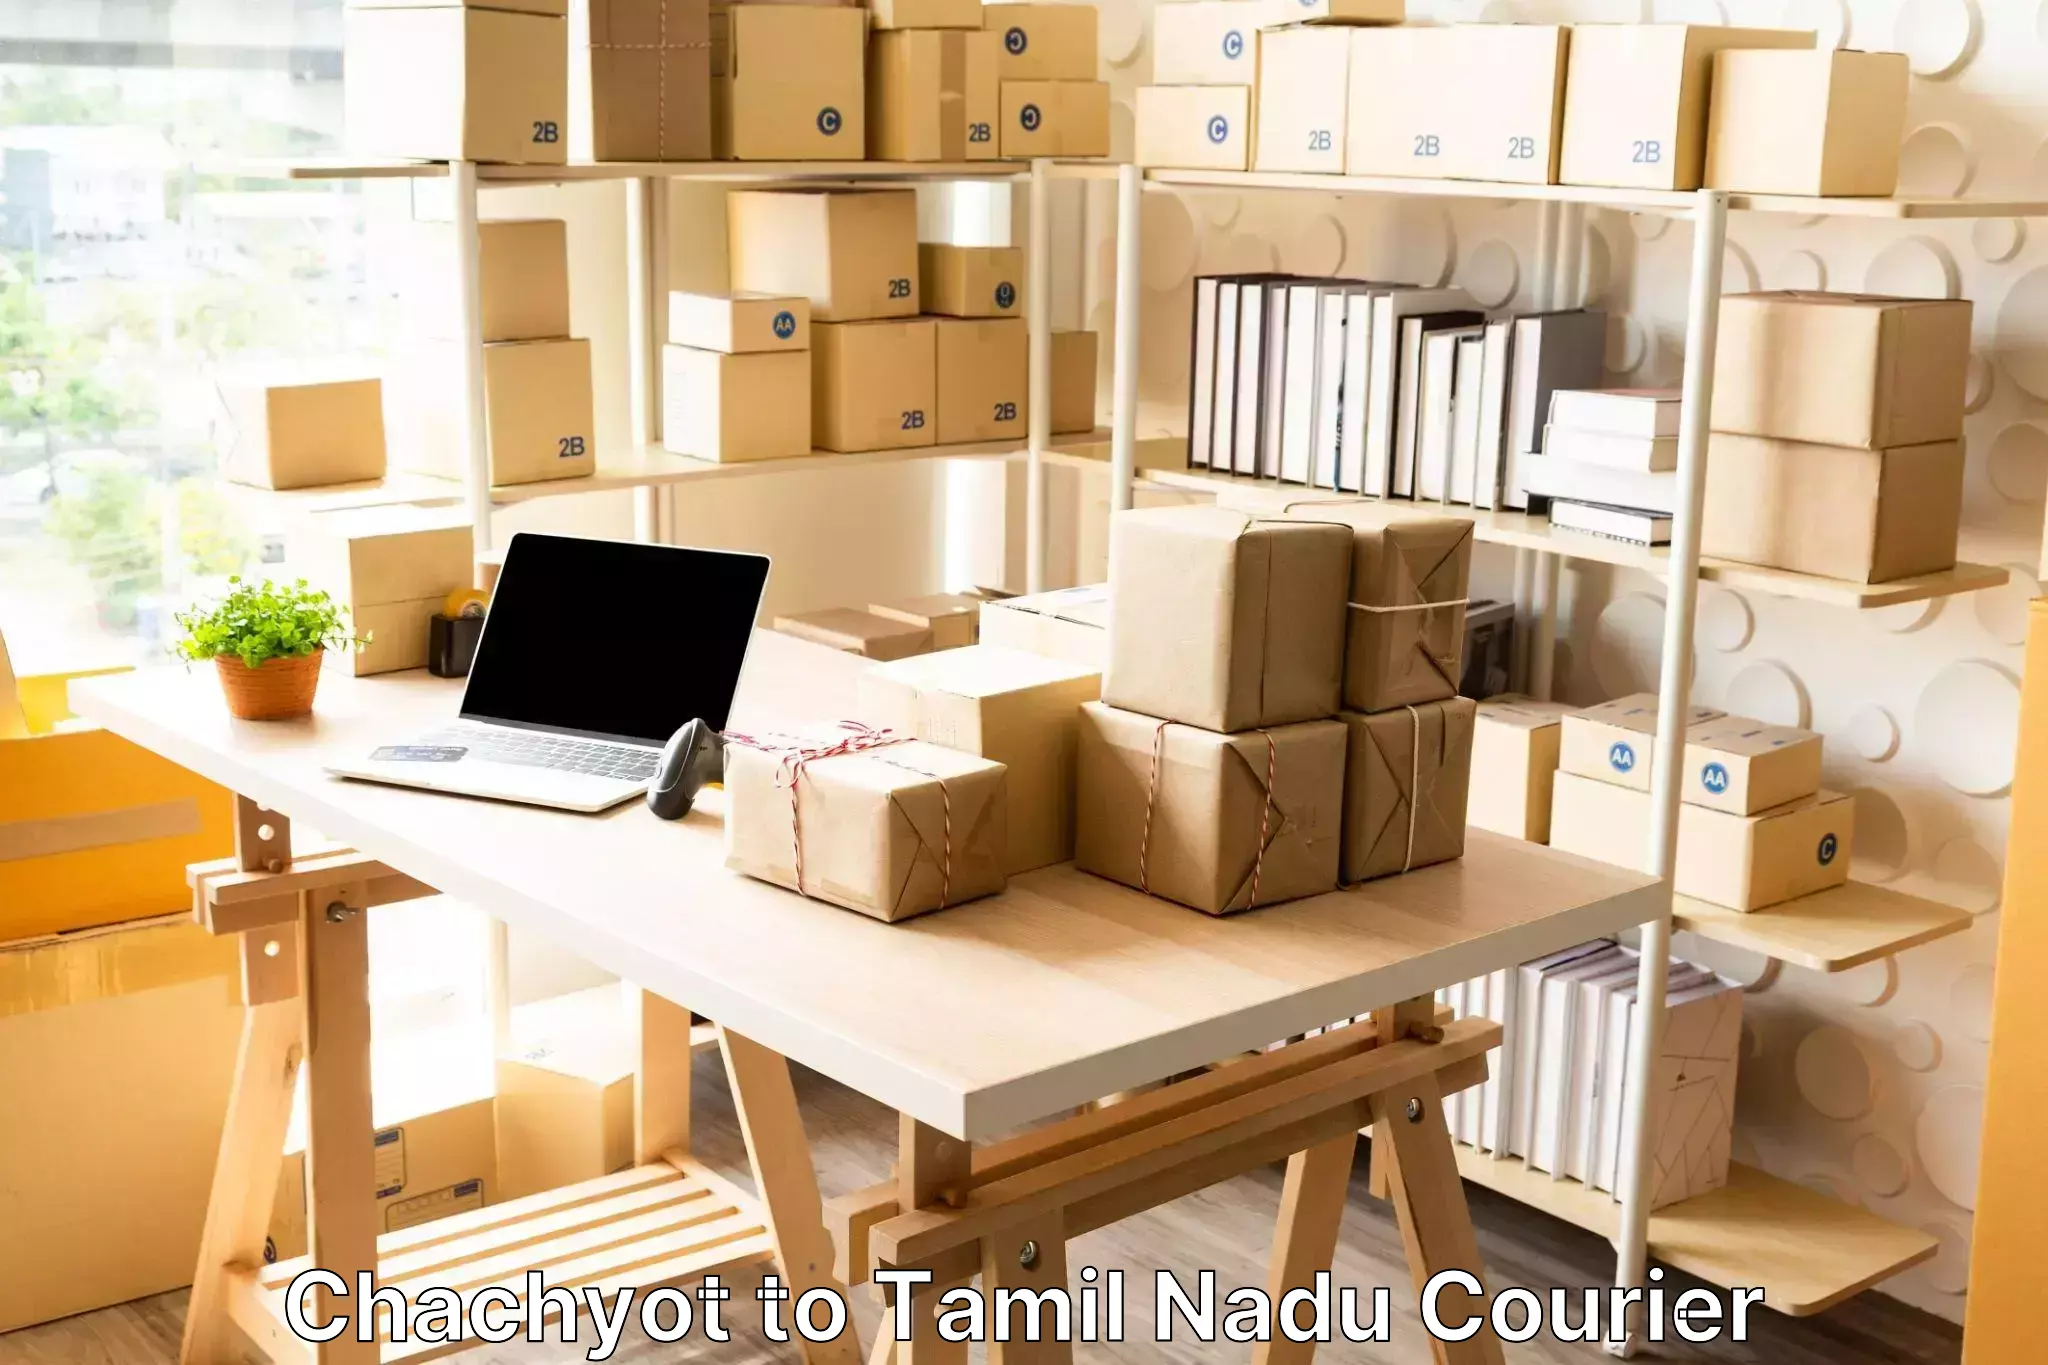 Luggage transport consultancy Chachyot to Tamil Nadu